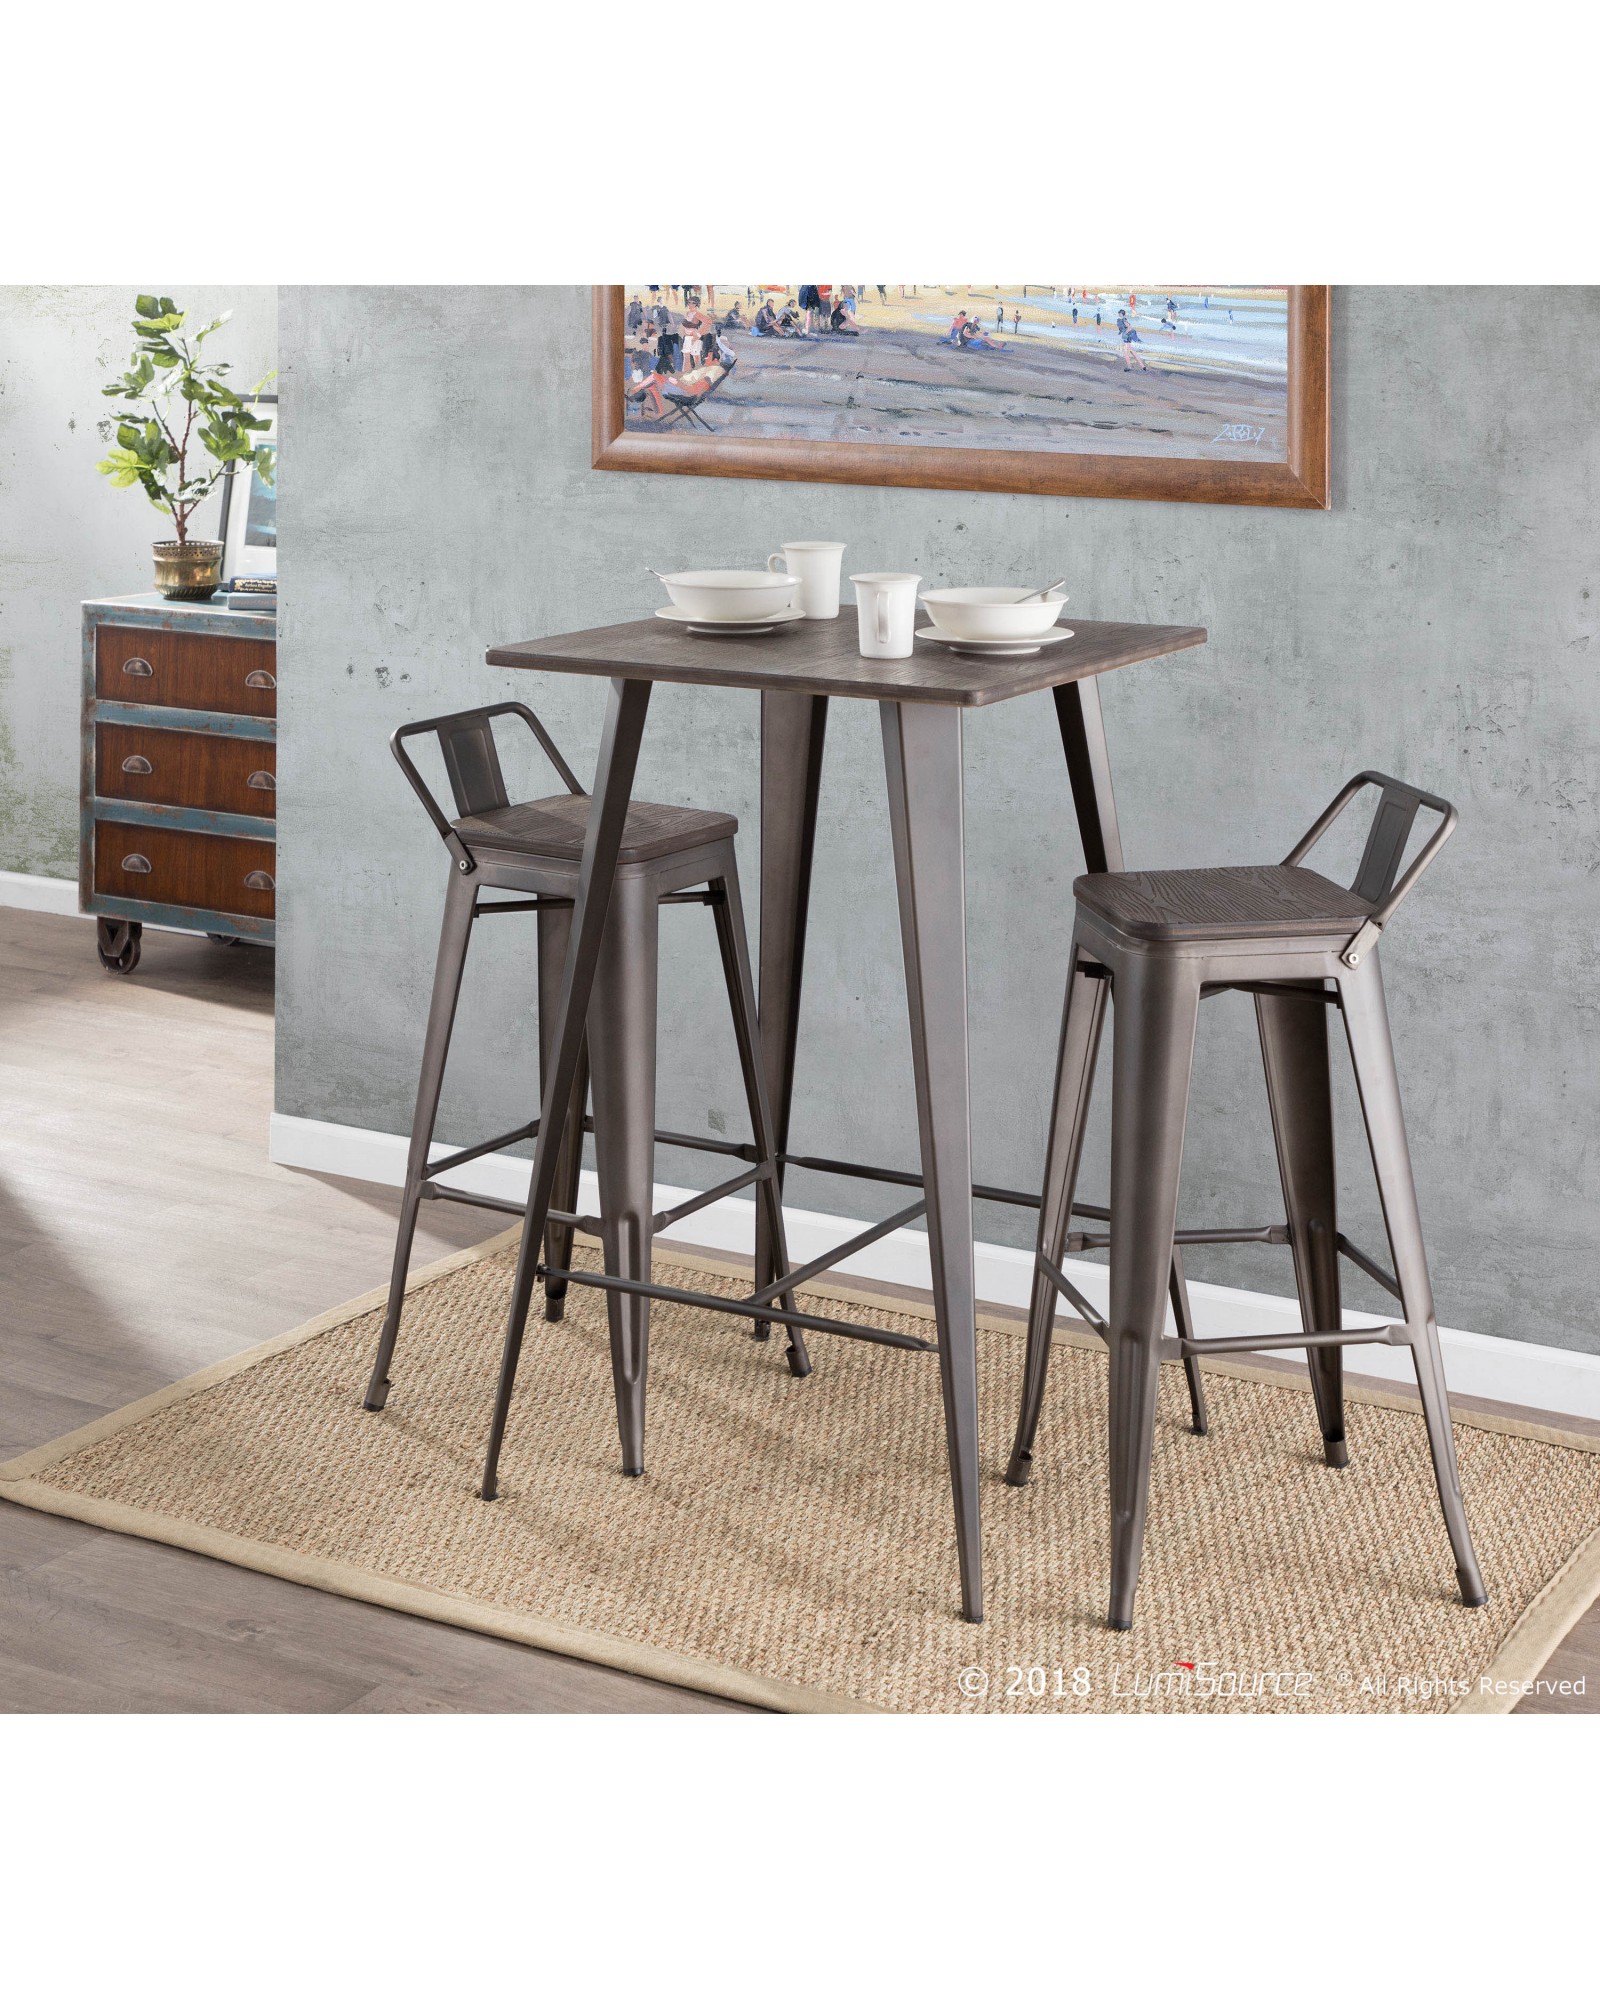 Oregon Industrial Low Back Barstool in Antique and Espresso - Set of 2